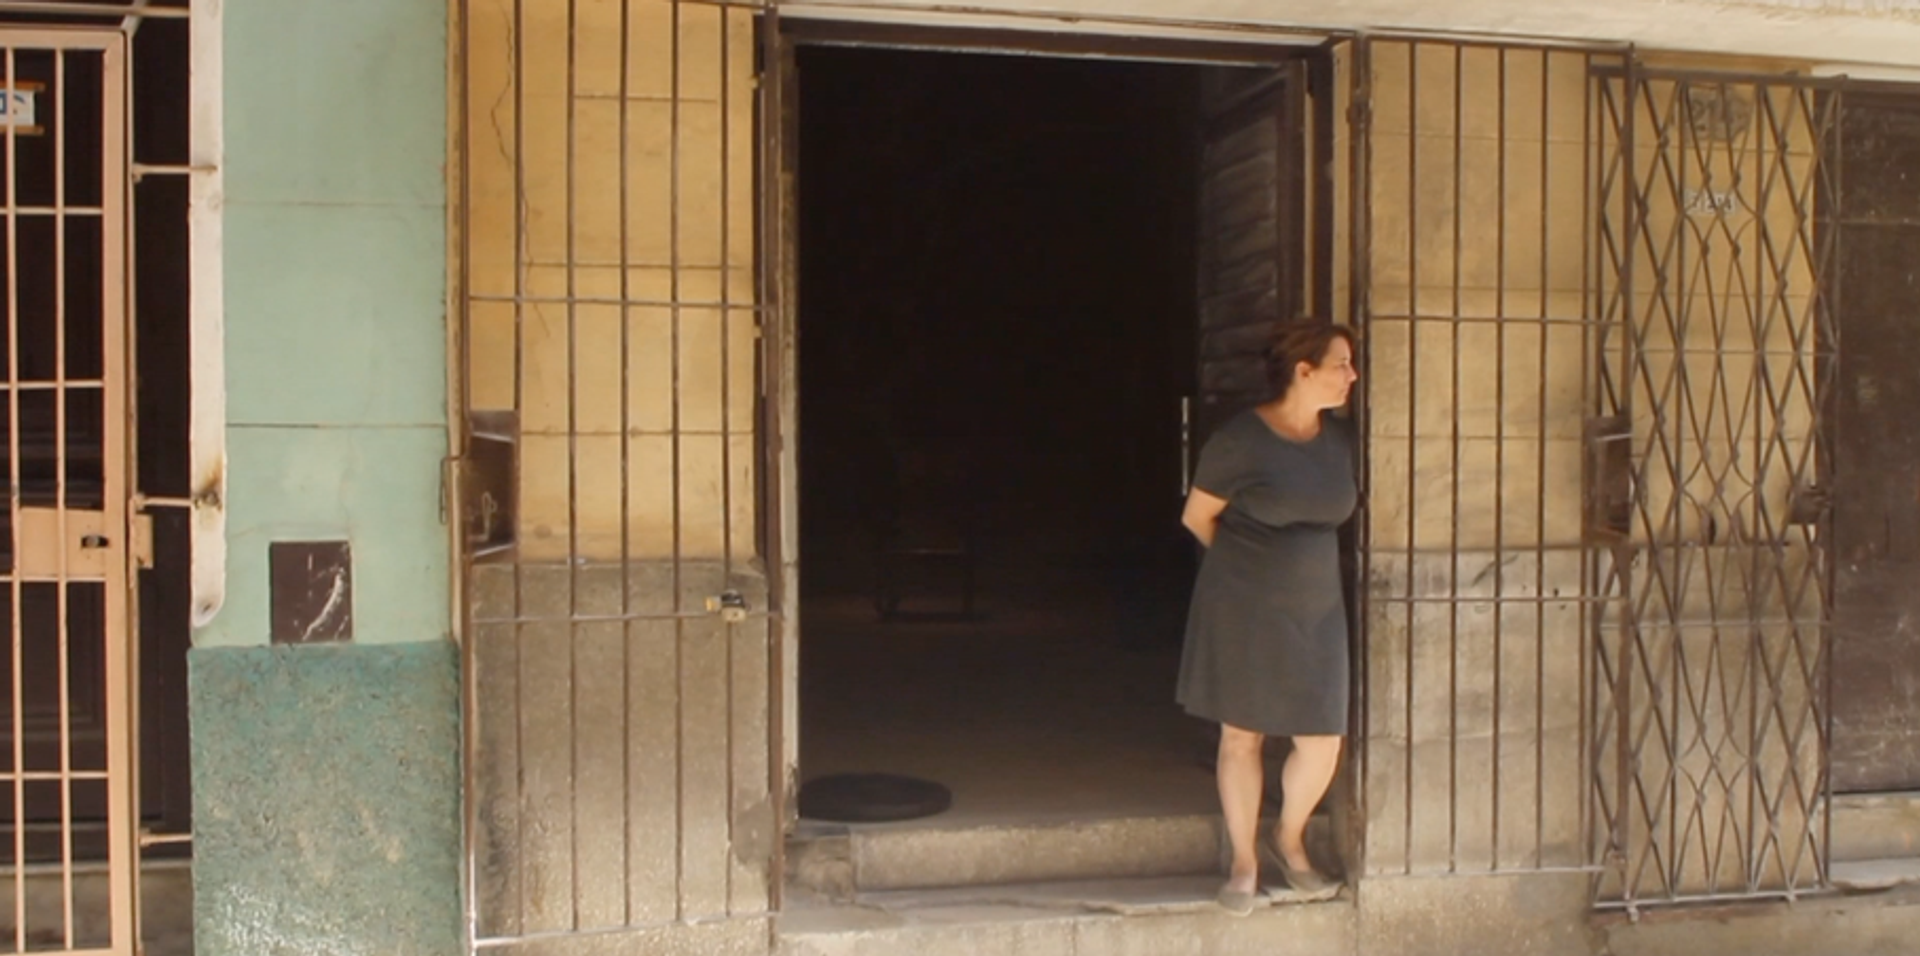 Tania Bruguera continues to protest against the Cuban government’s anti-free speech statute known as Decree 349, and has repeatedly been detained by Cuban authorities in recent years Photo: Tania Bruguera / Facebook